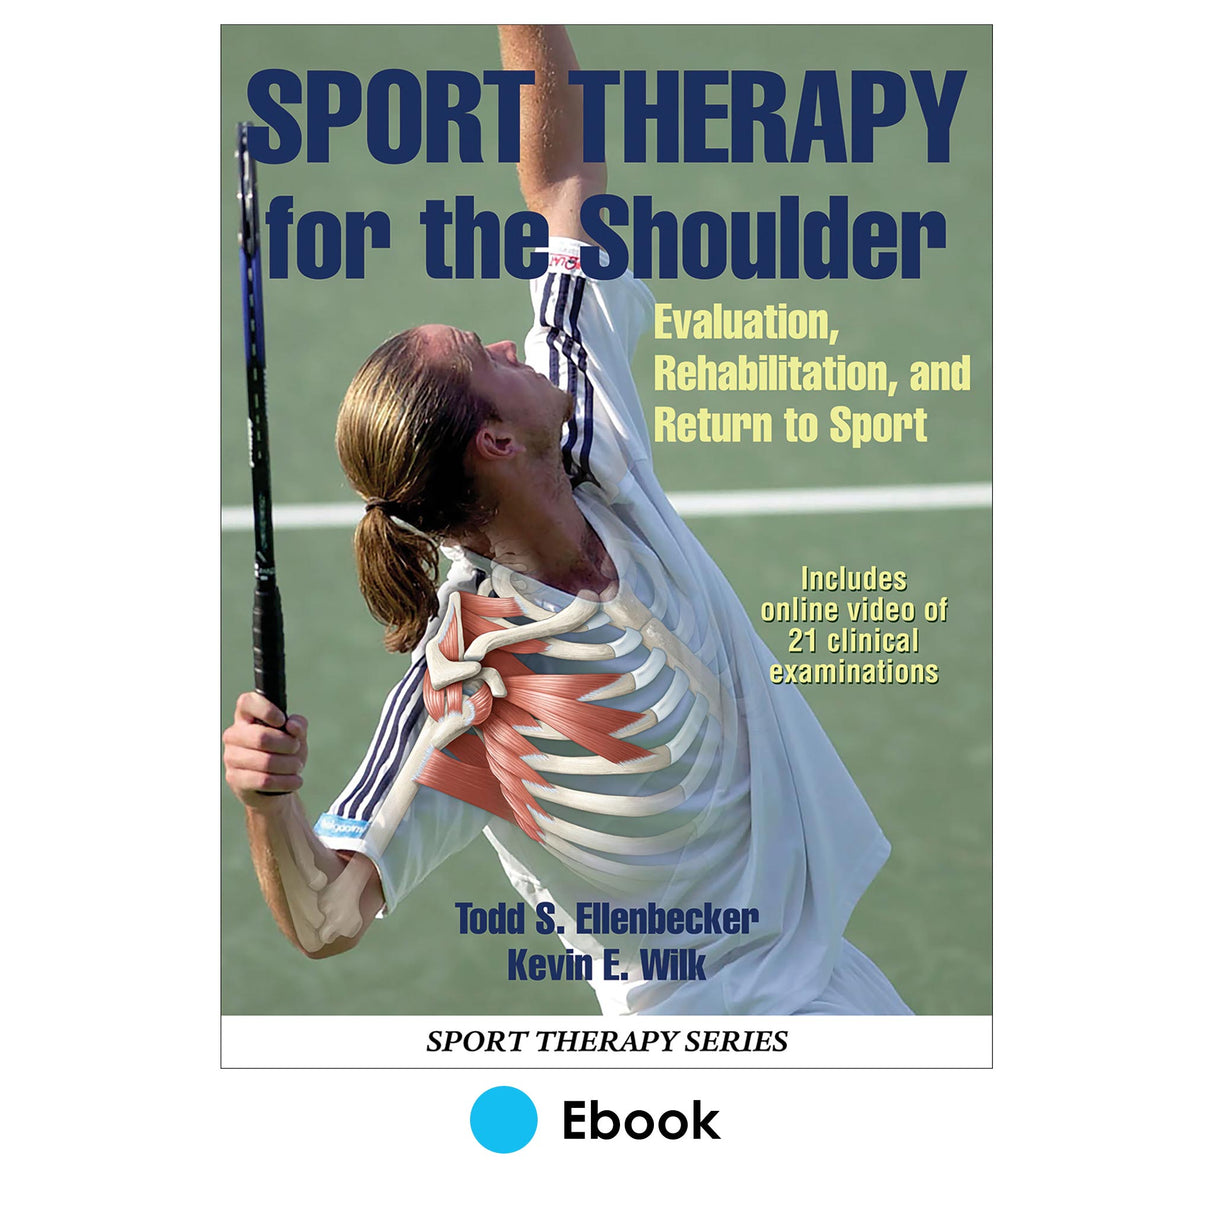 Sport Therapy for the Shoulder PDF With Online Video